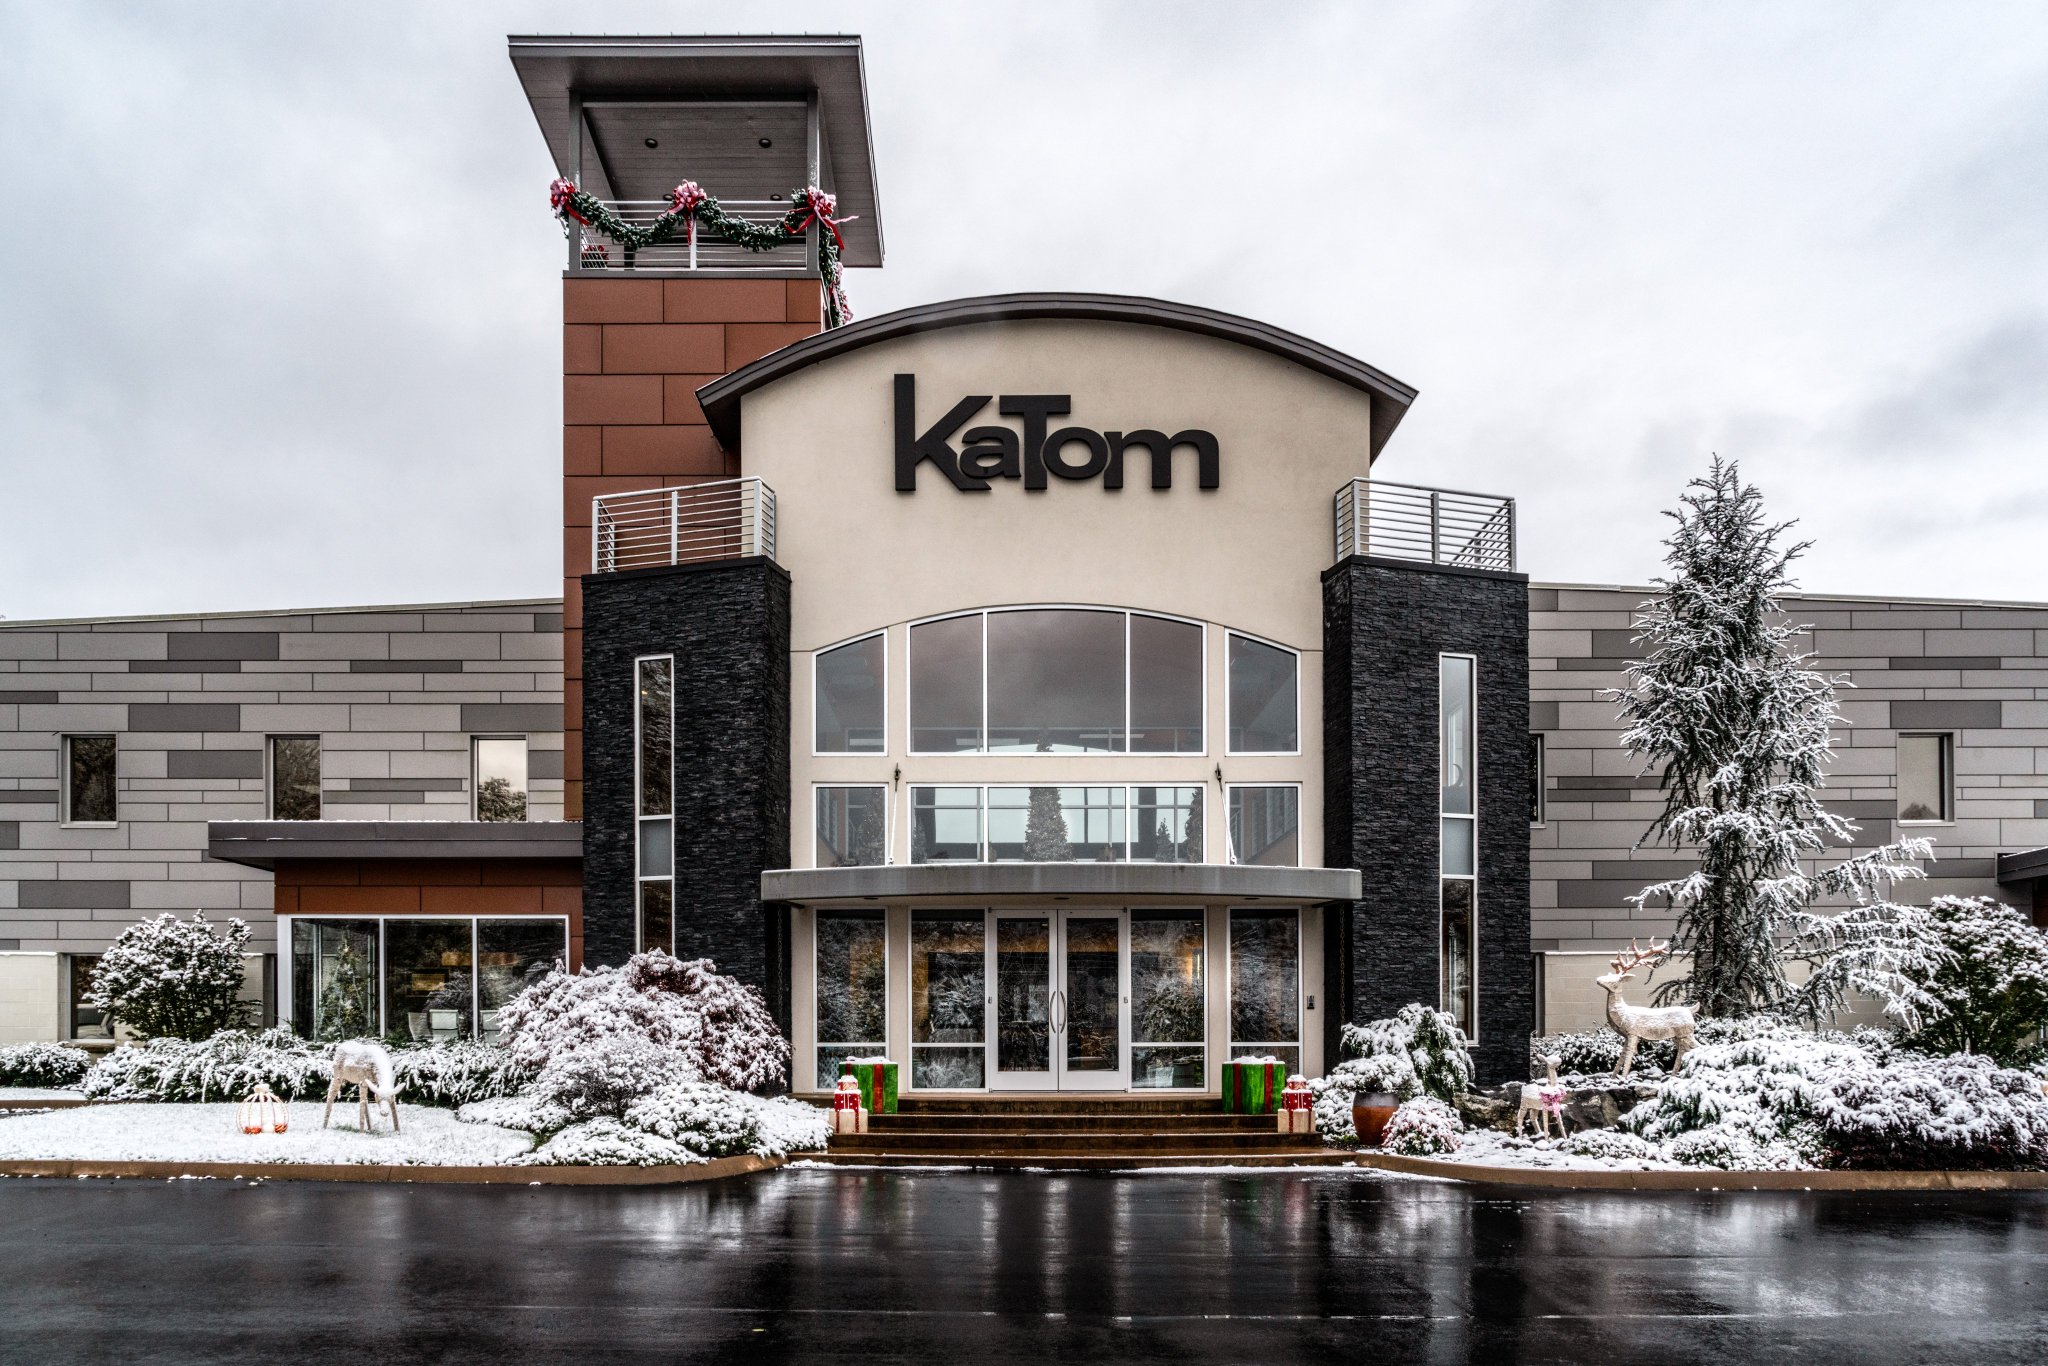 Katom Restaurant Supply Expands, Will Hire 100 - Knoxville ... in Round Rock Texas